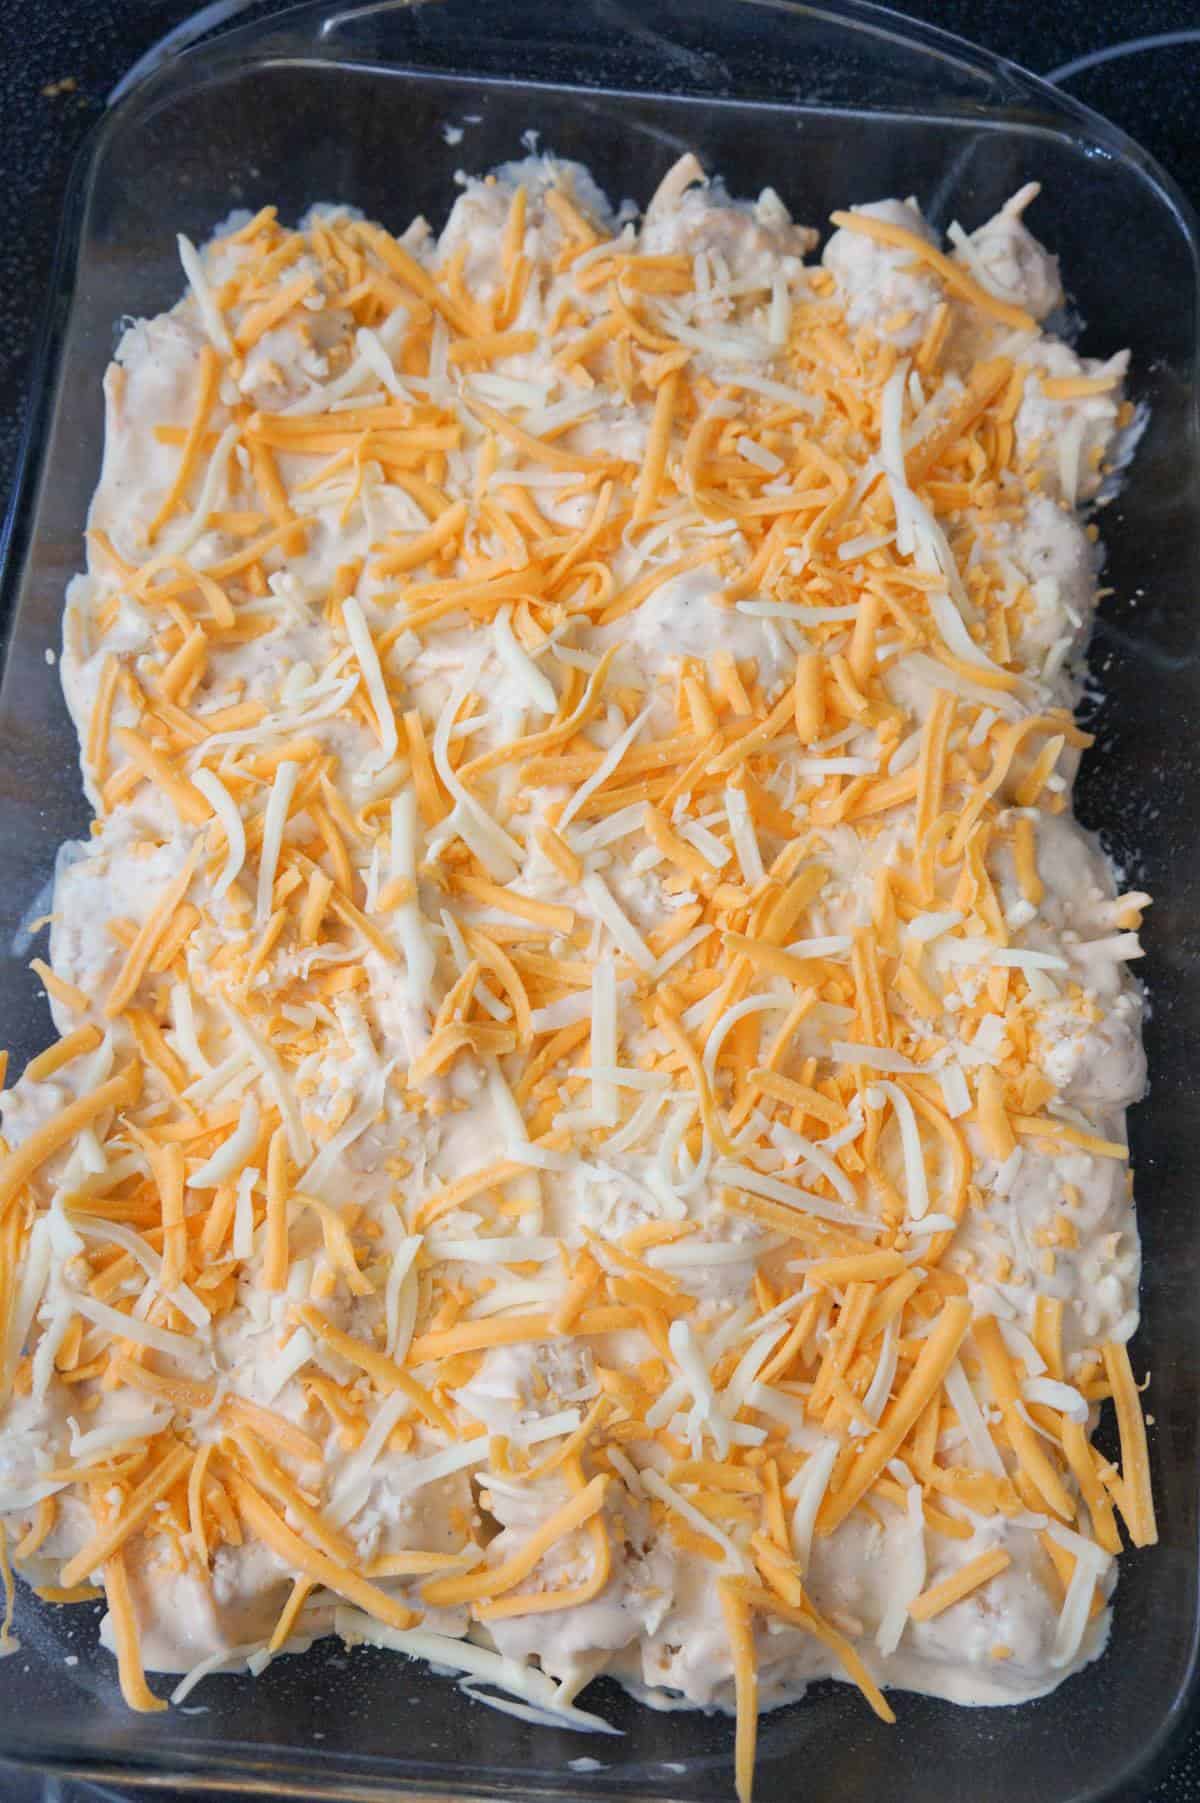 shredded cheddar and mozzarella on top of tater tot casserole before baking